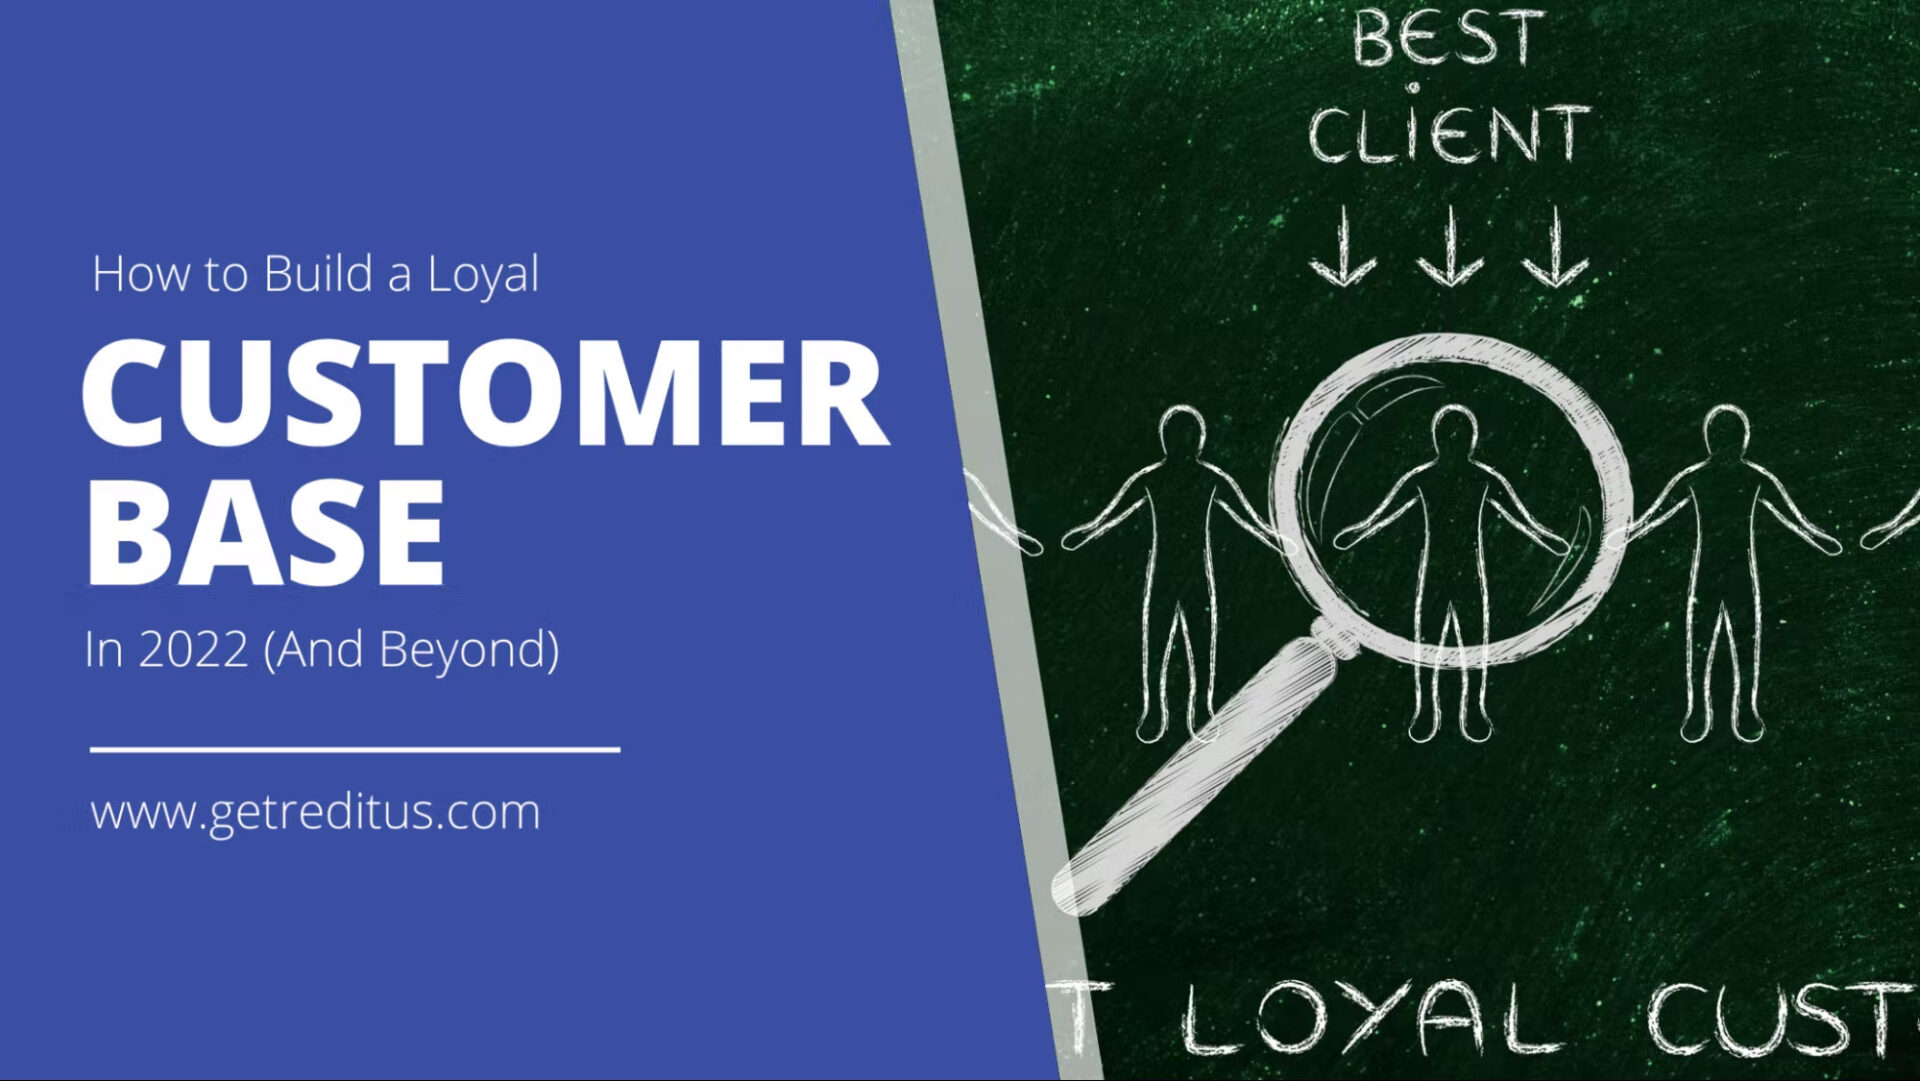 How To Build a Loyal Customer Base in 2023 (and Beyond)